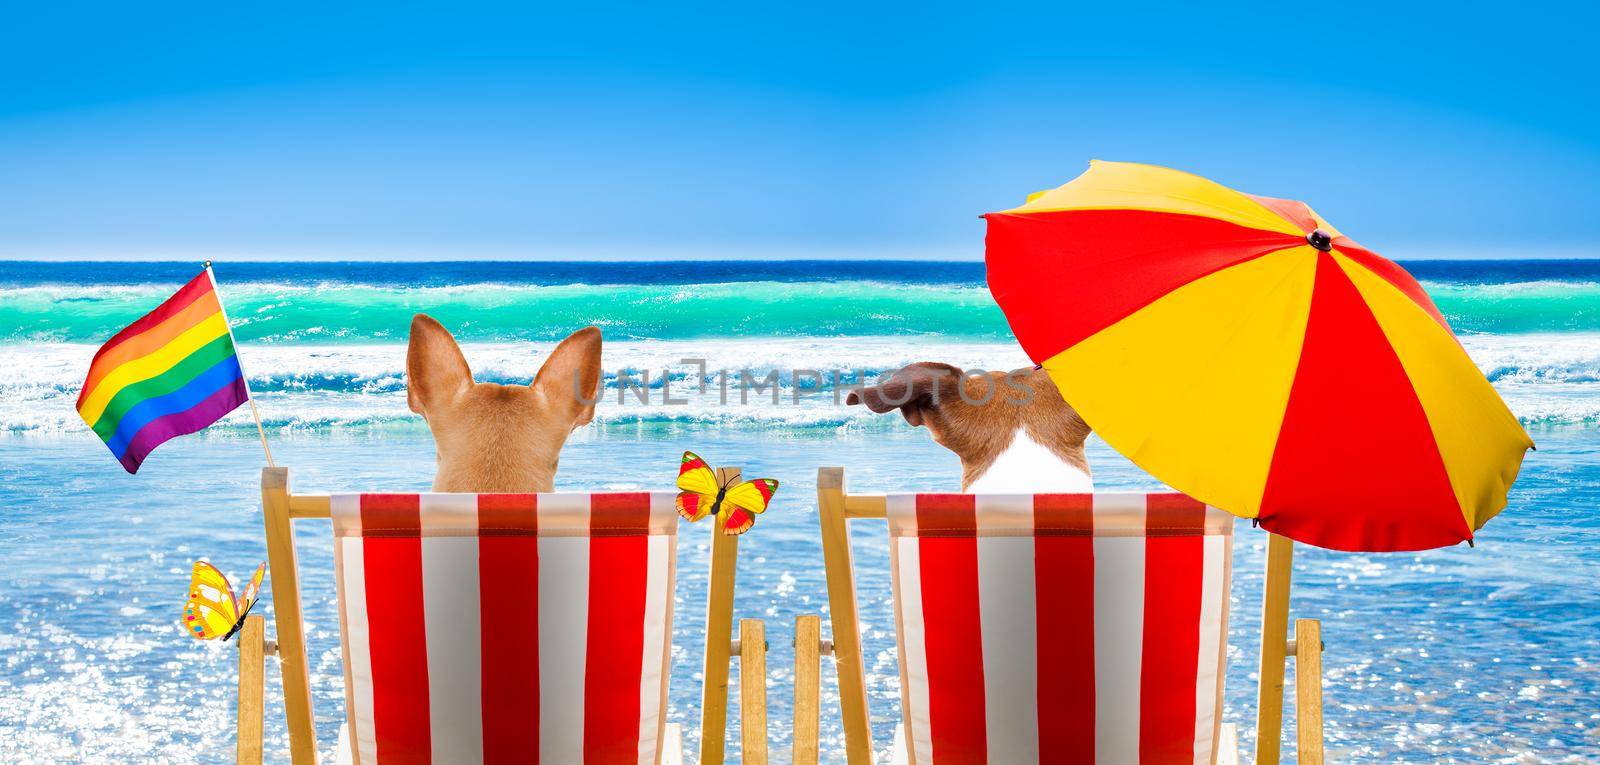 gay couple of dogs resting and relaxing on a hammock or beach chair under umbrella at the beach ocean shore, on summer vacation holidays